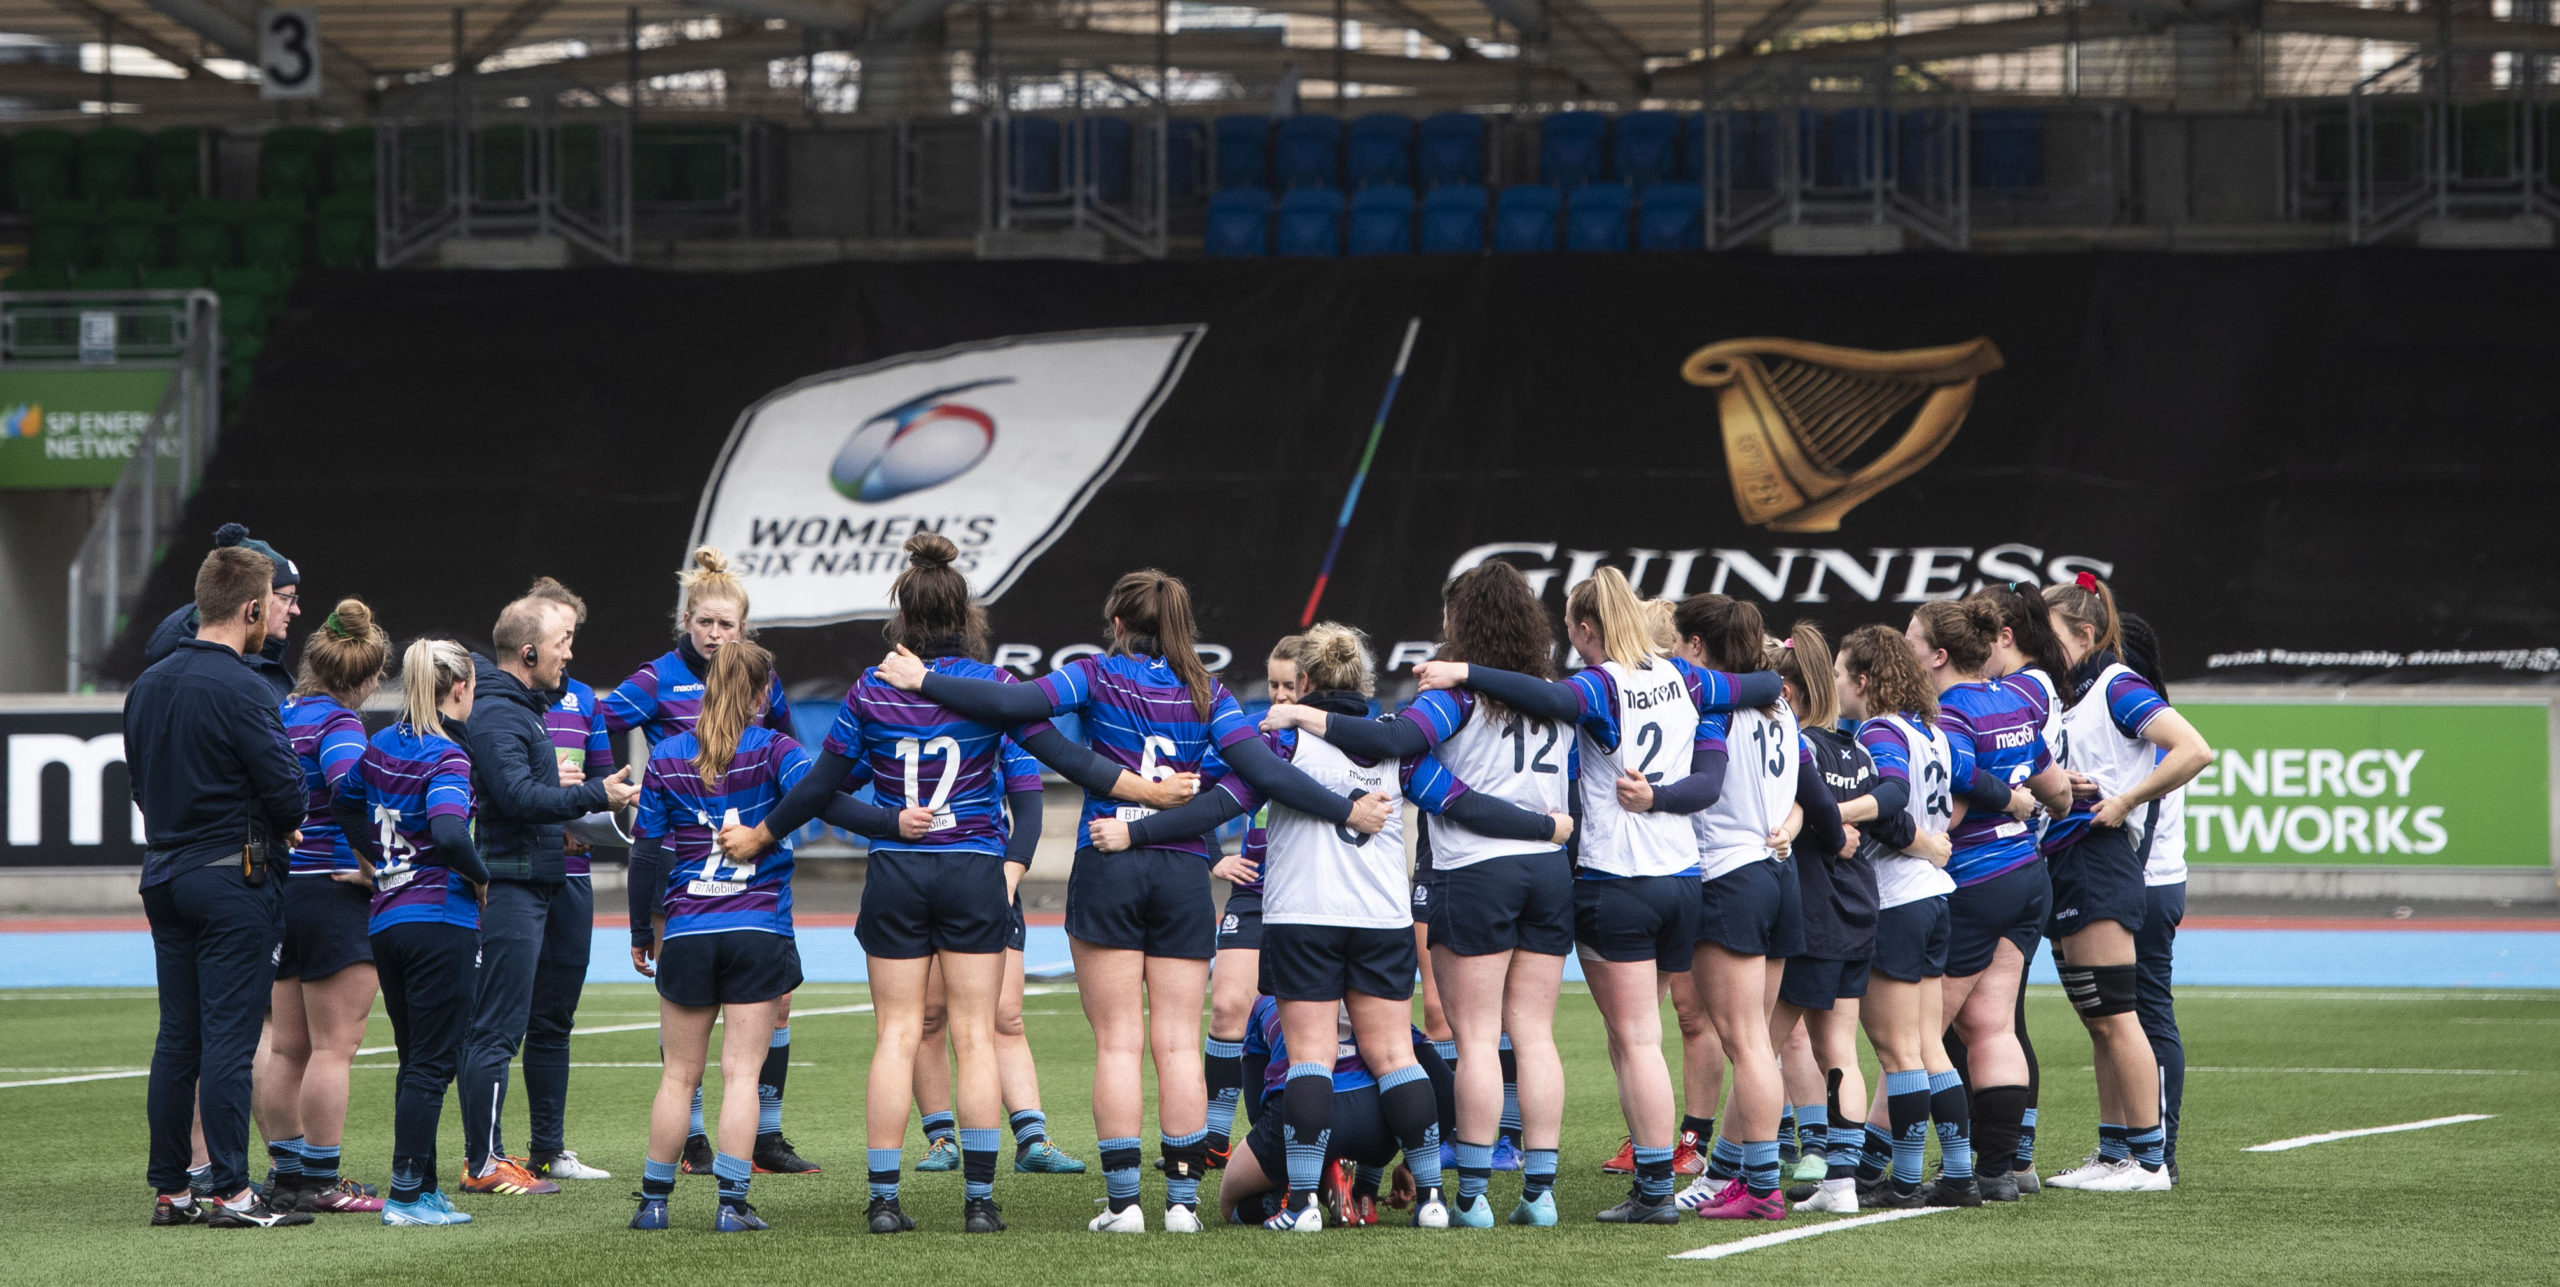 Scotland Women in training at Scotstoun earlier this year.